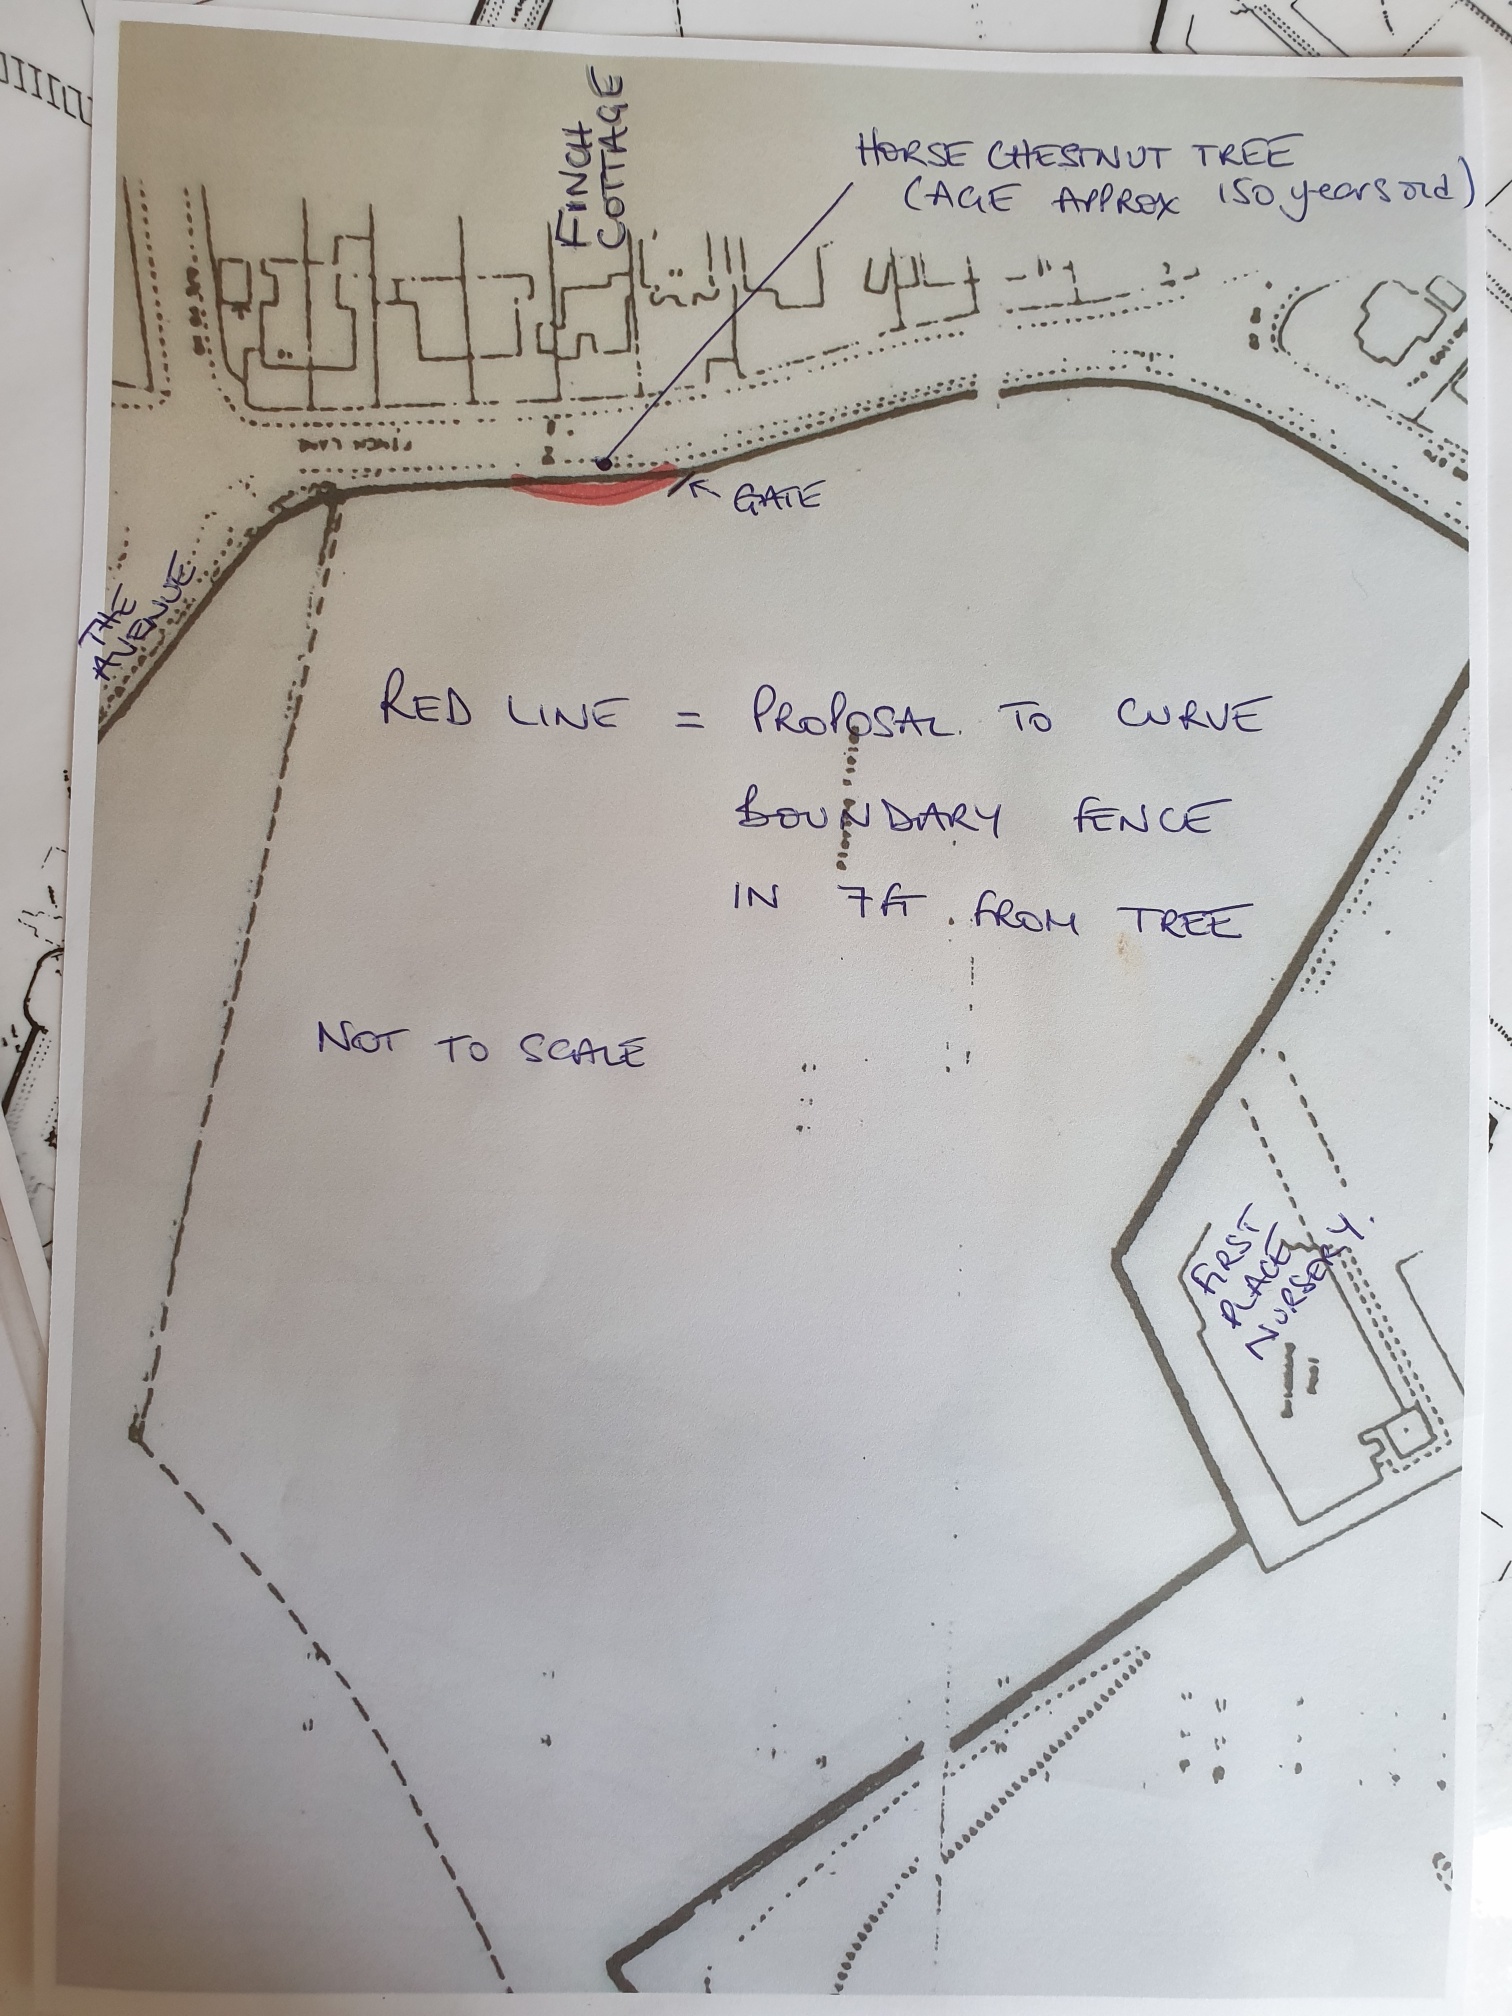 This drawing shows in red where the fence line could be curved to create new space for pedestrians. Credit: Cllr Laurence Brass